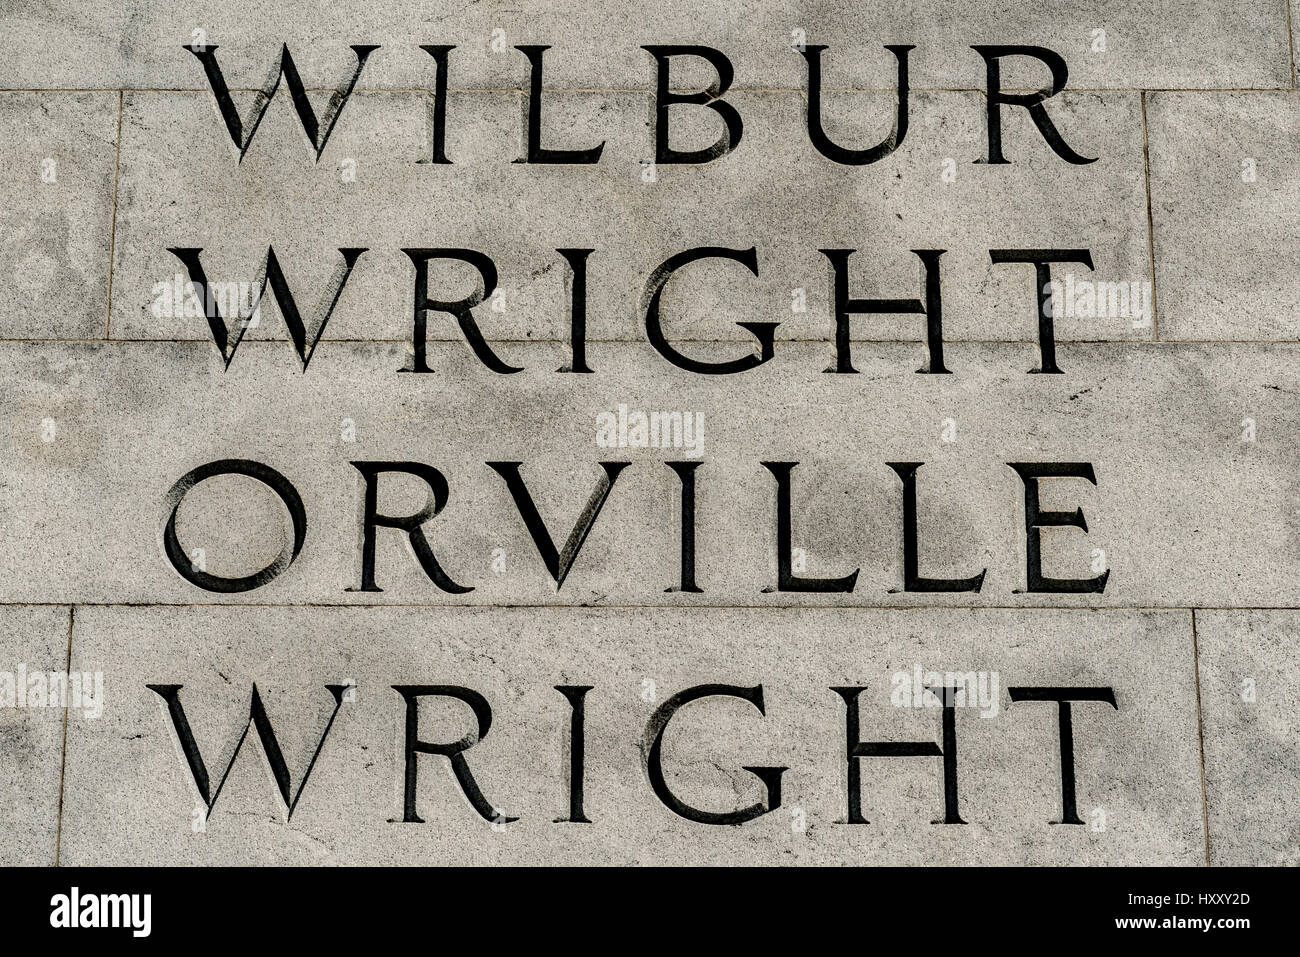 The Wright Brothers National Memorial in Kill Devil Hills, NC draws tourists from all around. It is an obelisk on a hill with a large grass field. Stock Photo